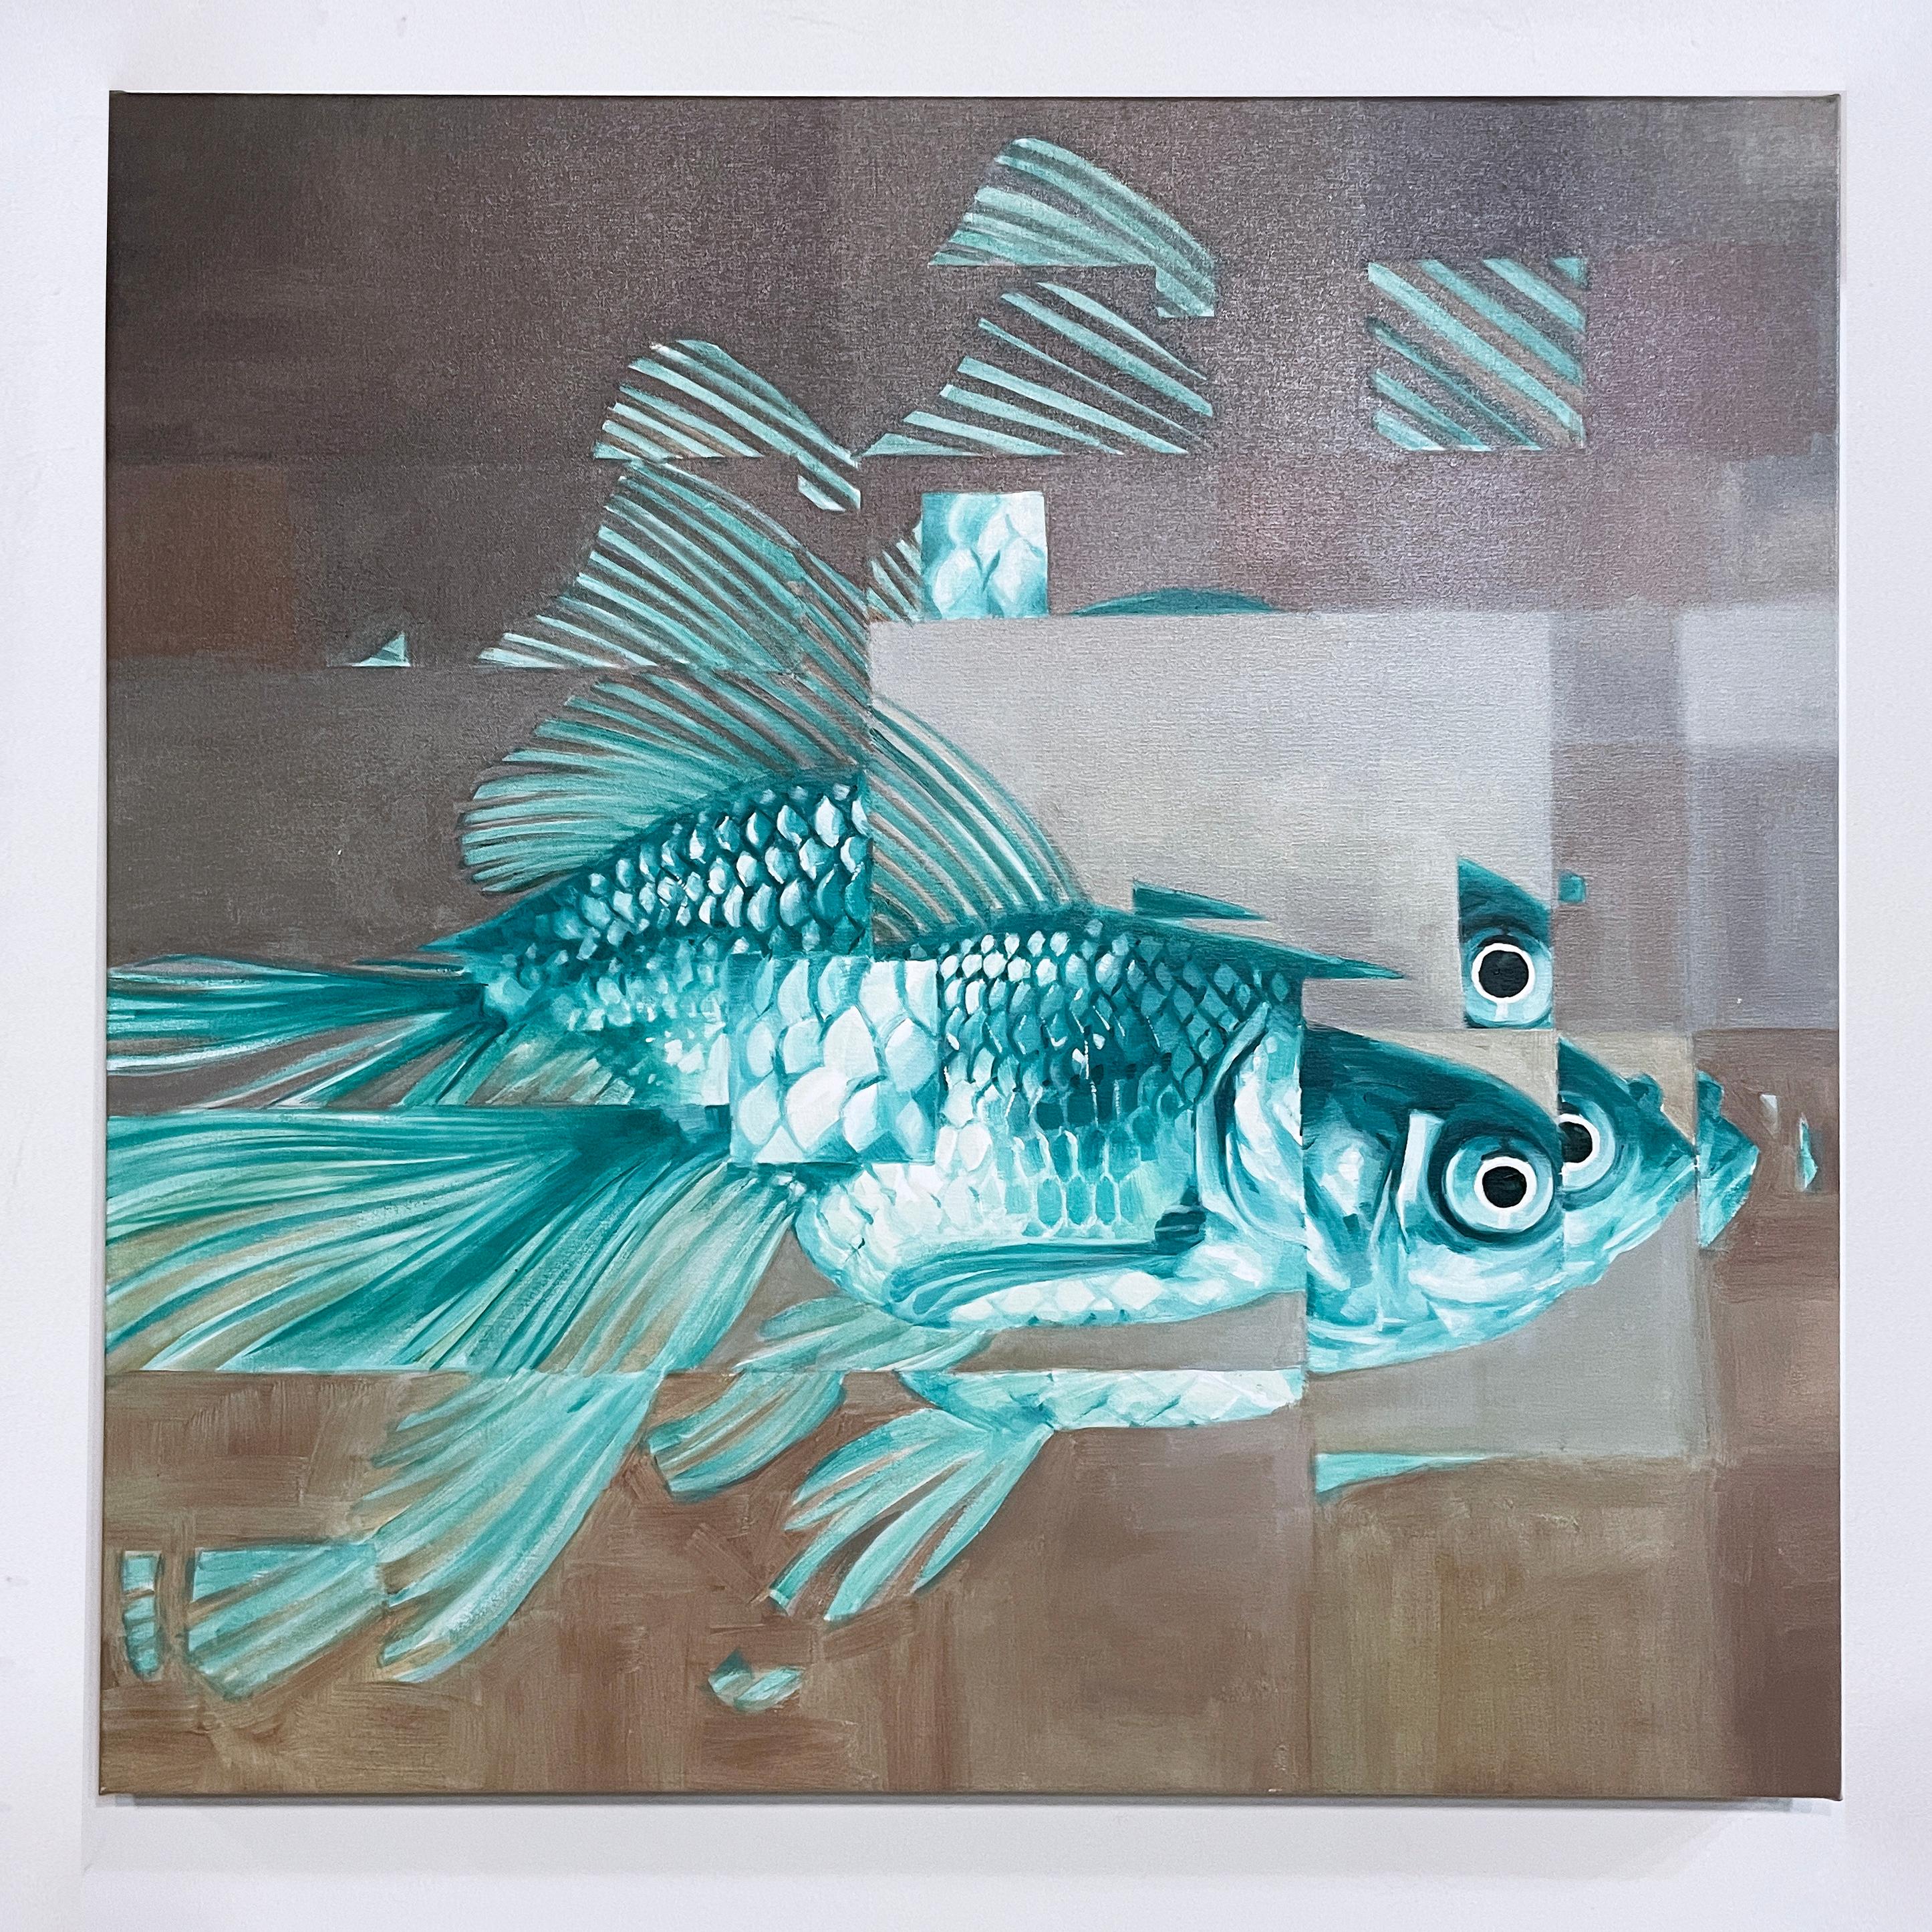 Big Fish Too (2022) oil on canvas, gray, pewter, blue, pixels, water, goldfish - Painting by RU8ICON1